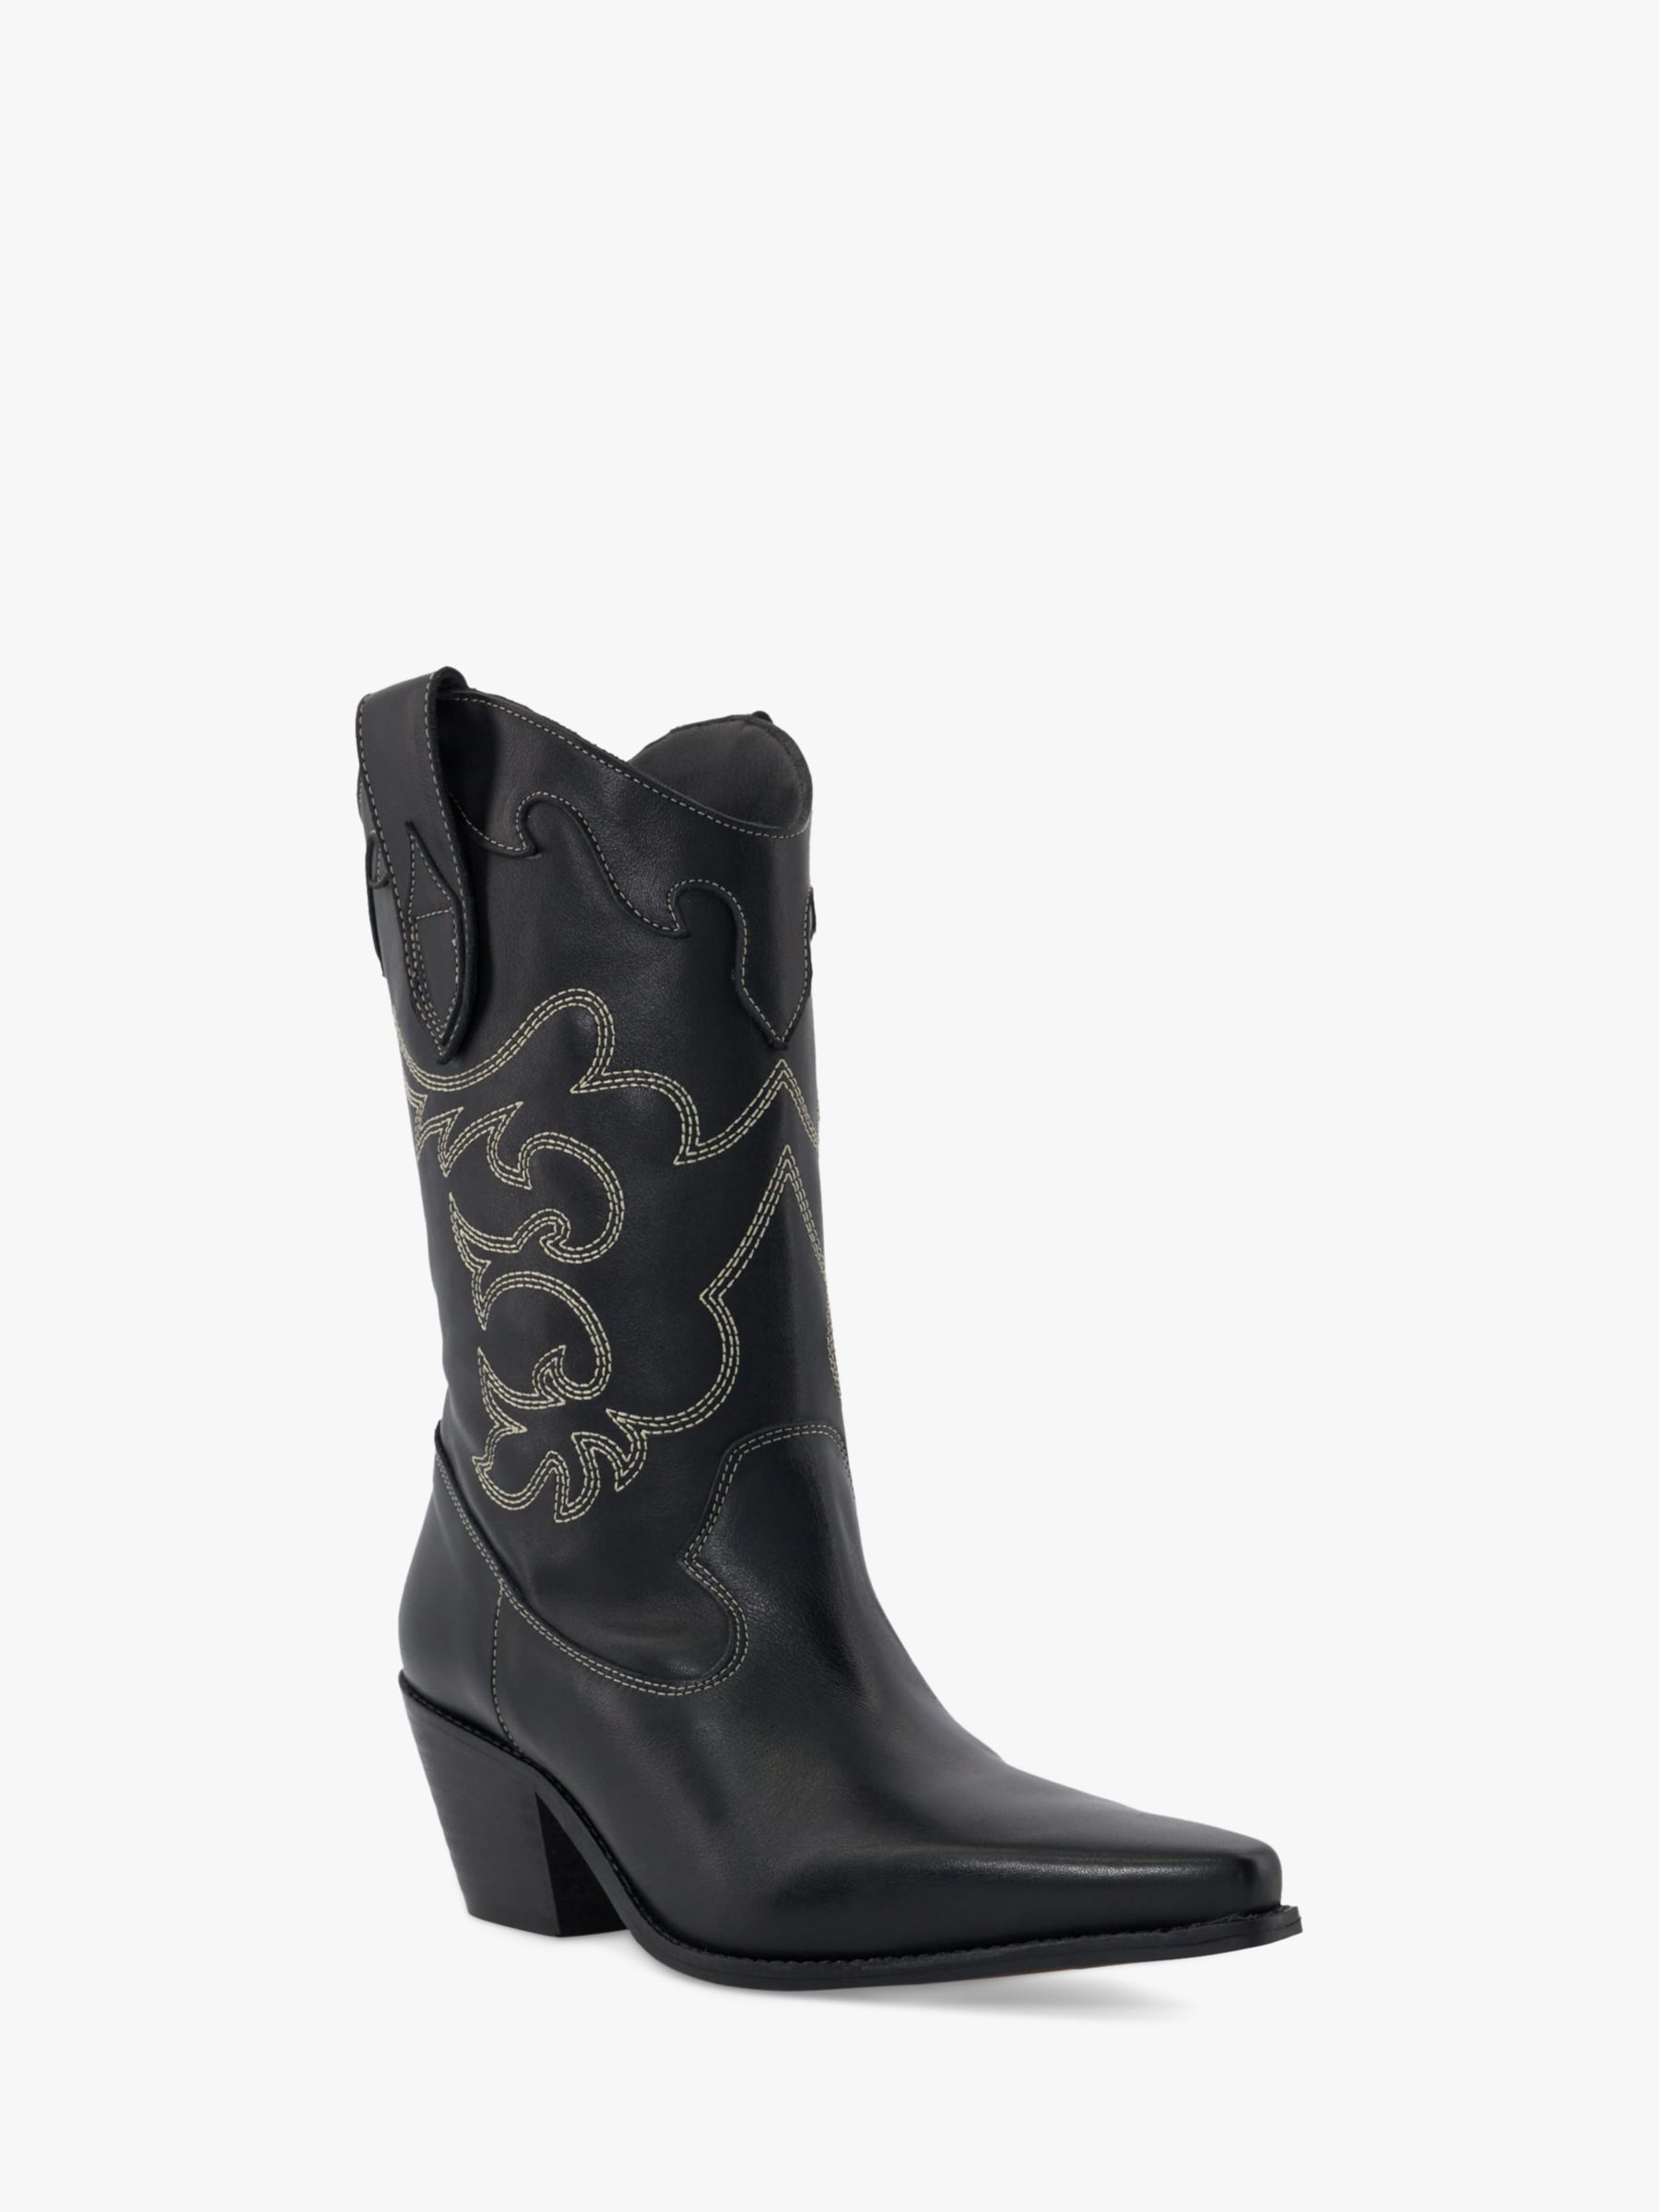 Buy Dune Prickly Leather Cowboy Boots Online at johnlewis.com